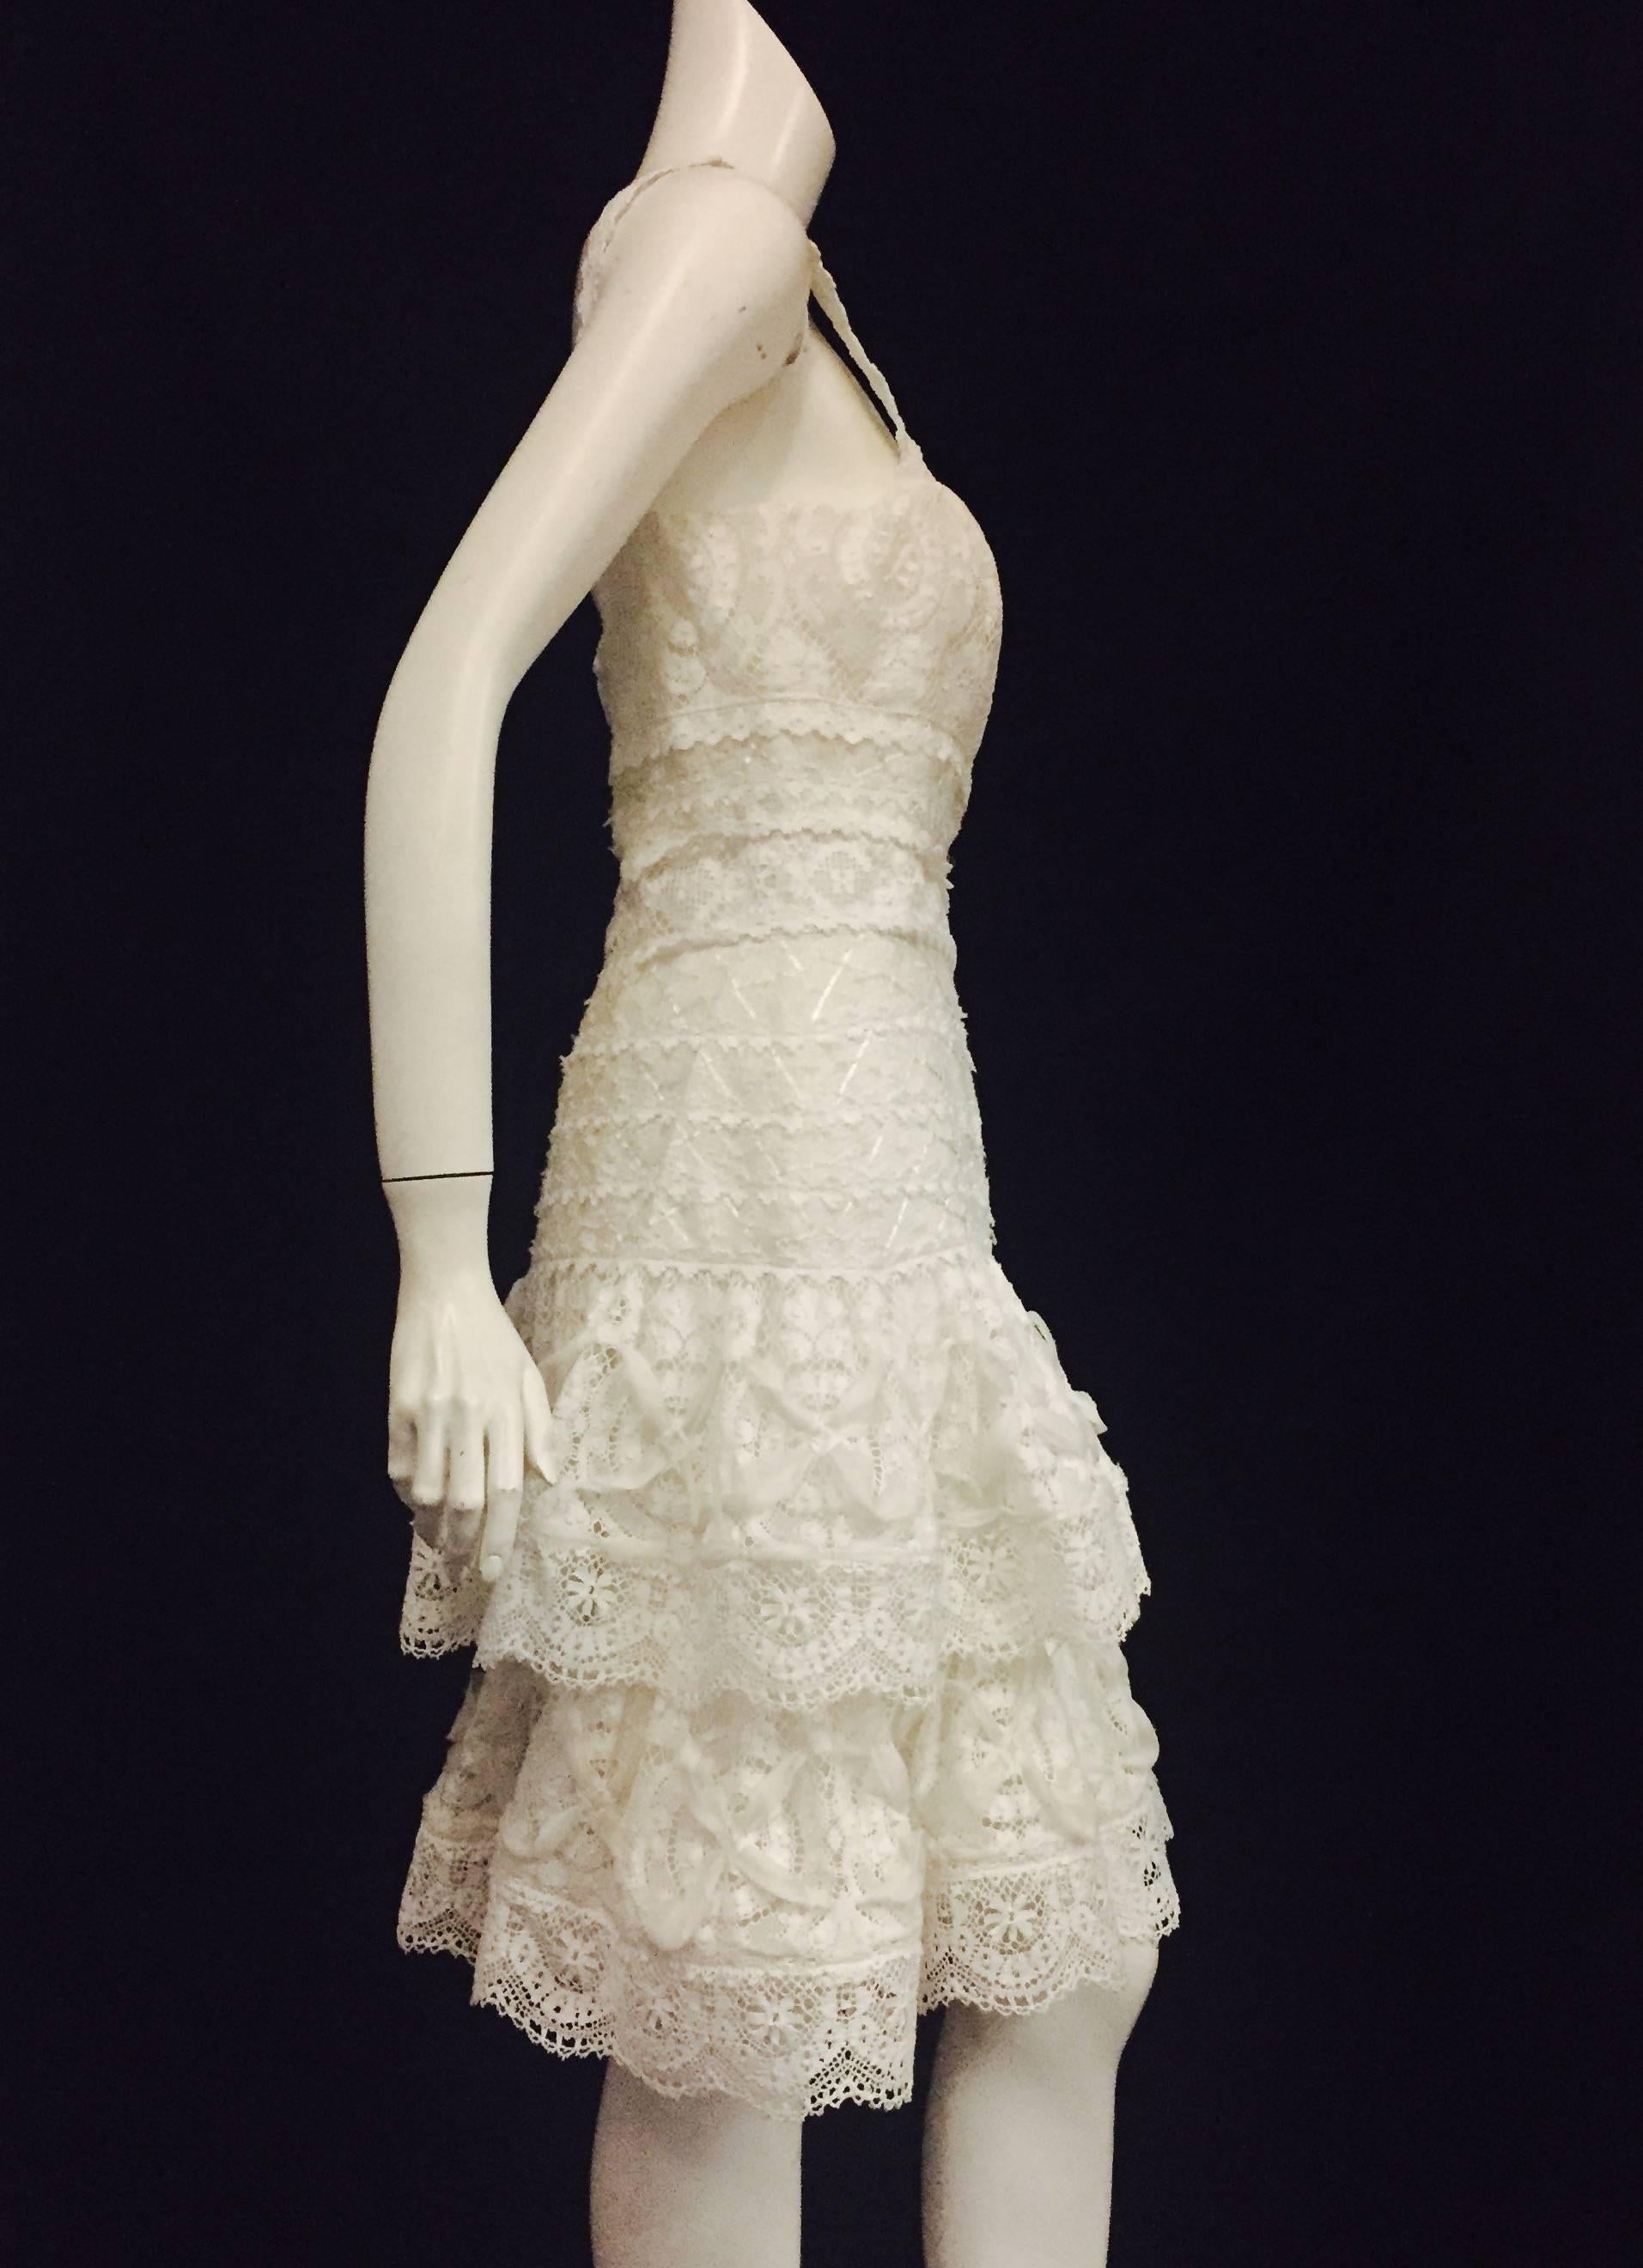 Romantically designed Oscar de la Renta dress in white lace.  Perfect flirty summer dress with shoulder straps.  Lace and ribbons throughout this delicate 3 tier ruffled knee-length dress. Enchanting Oscar de la Renta for an Enchanted Evening. 